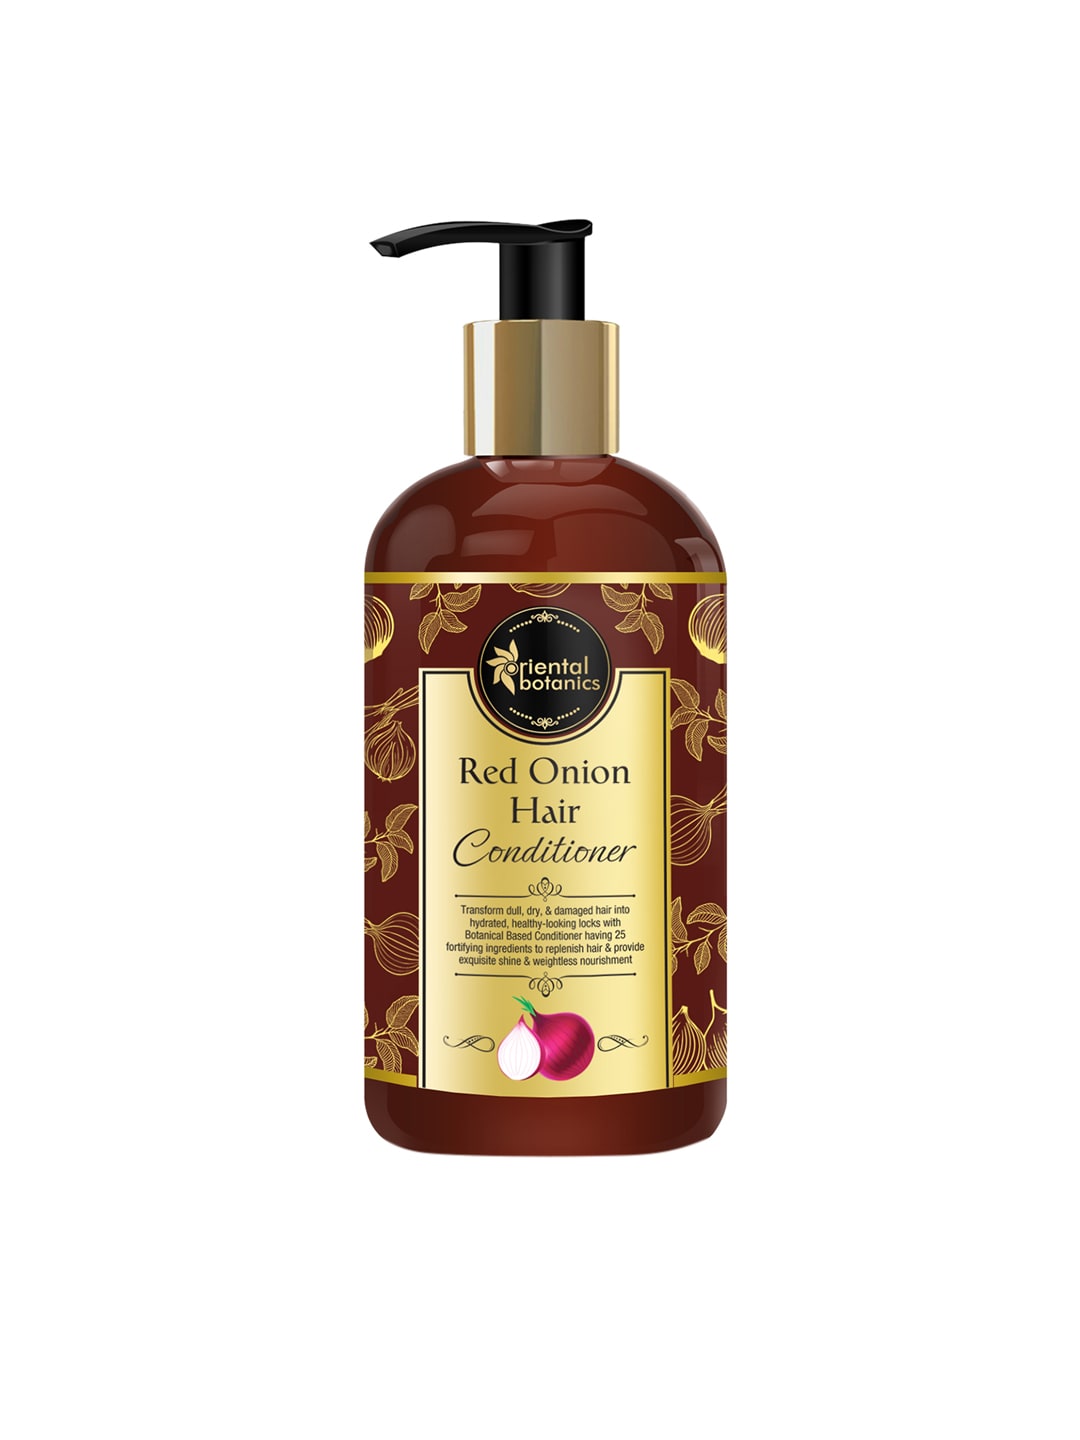 Oriental Botanics Unisex Red Onion Hair Conditioner with 25 Botanical Actives 300 ml Price in India